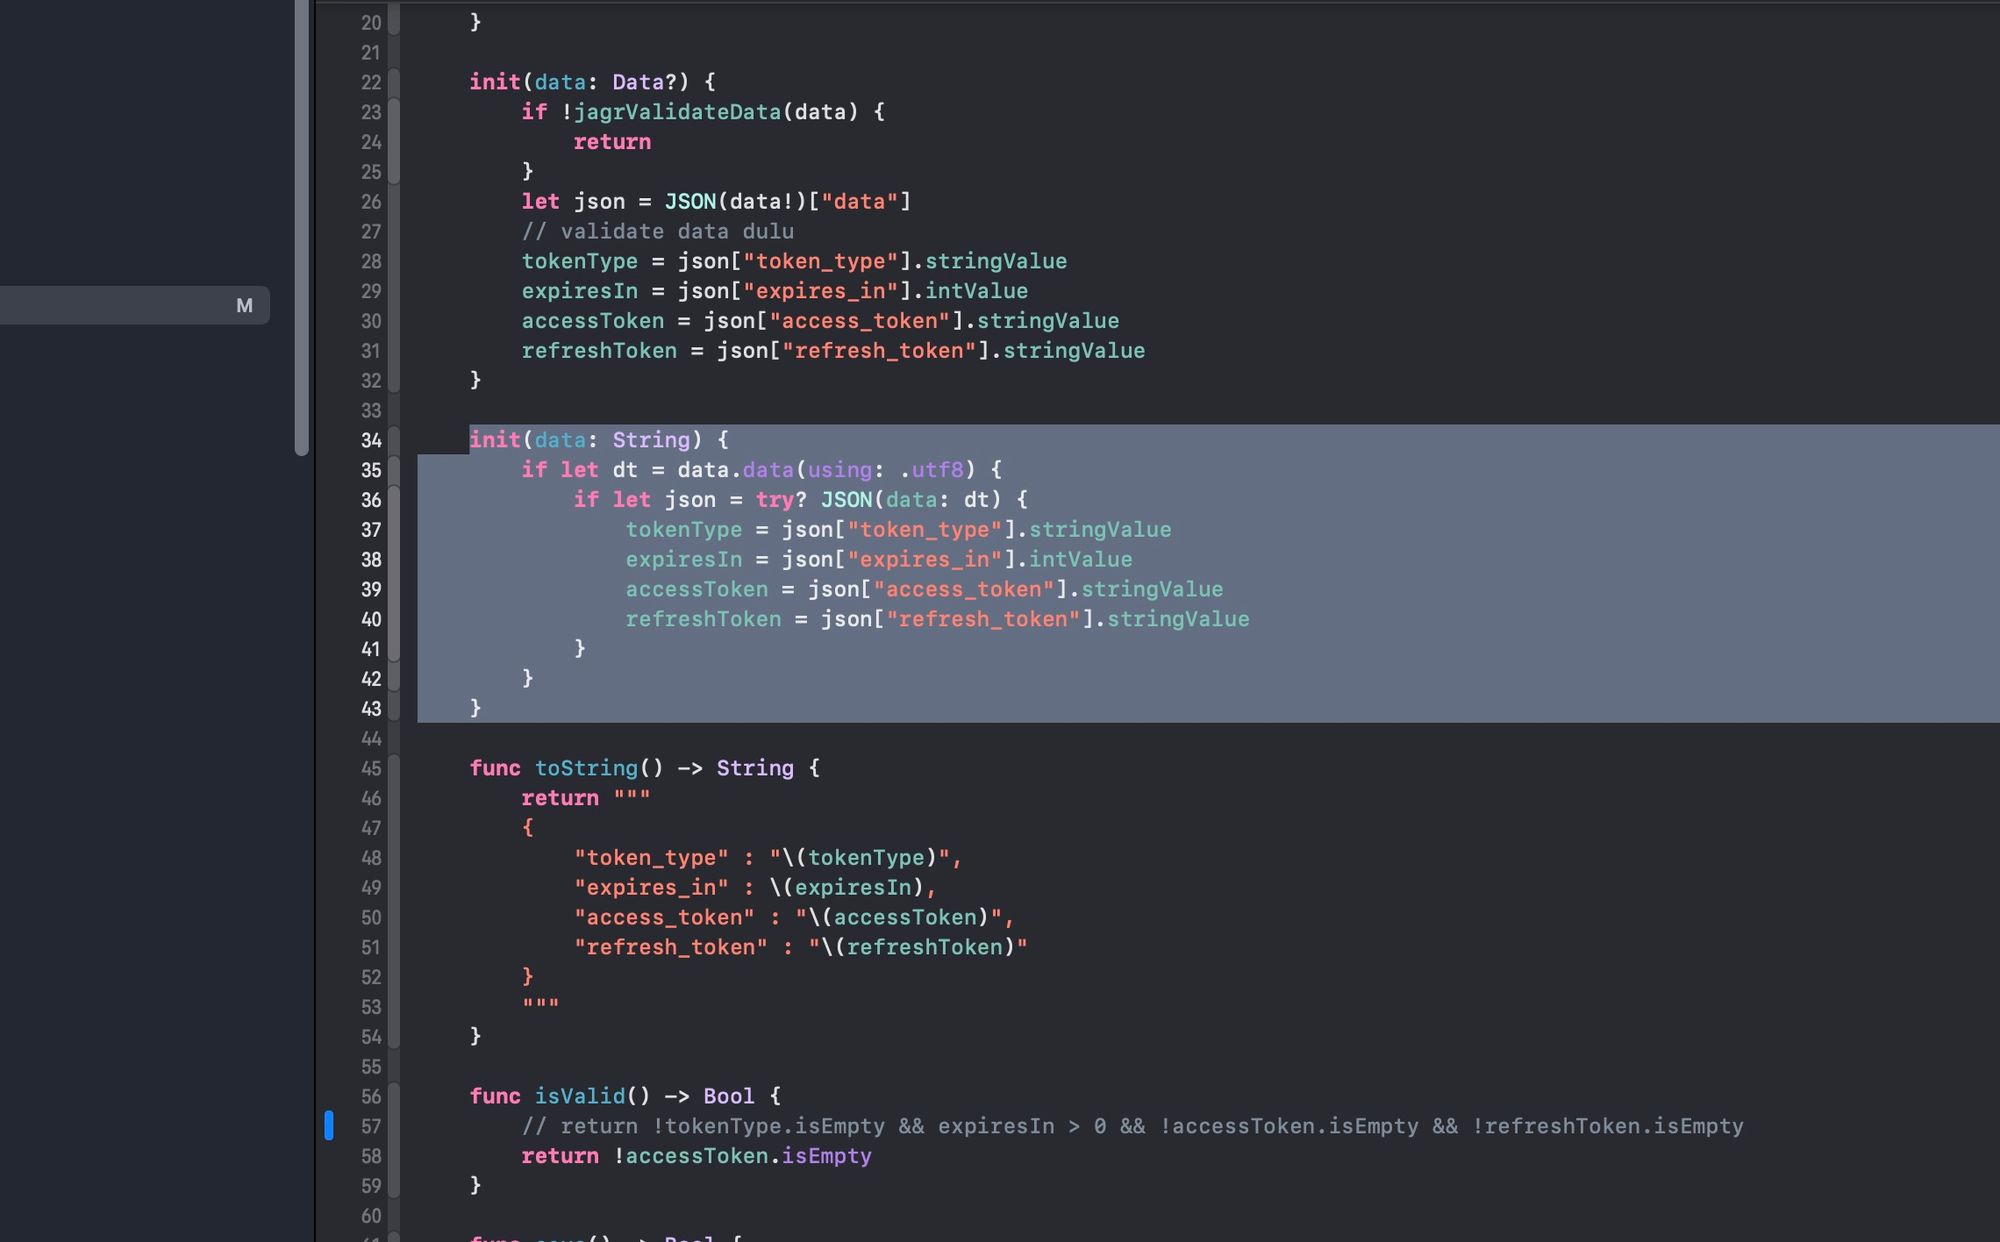 Easy way to reformat/beautify code in Xcode